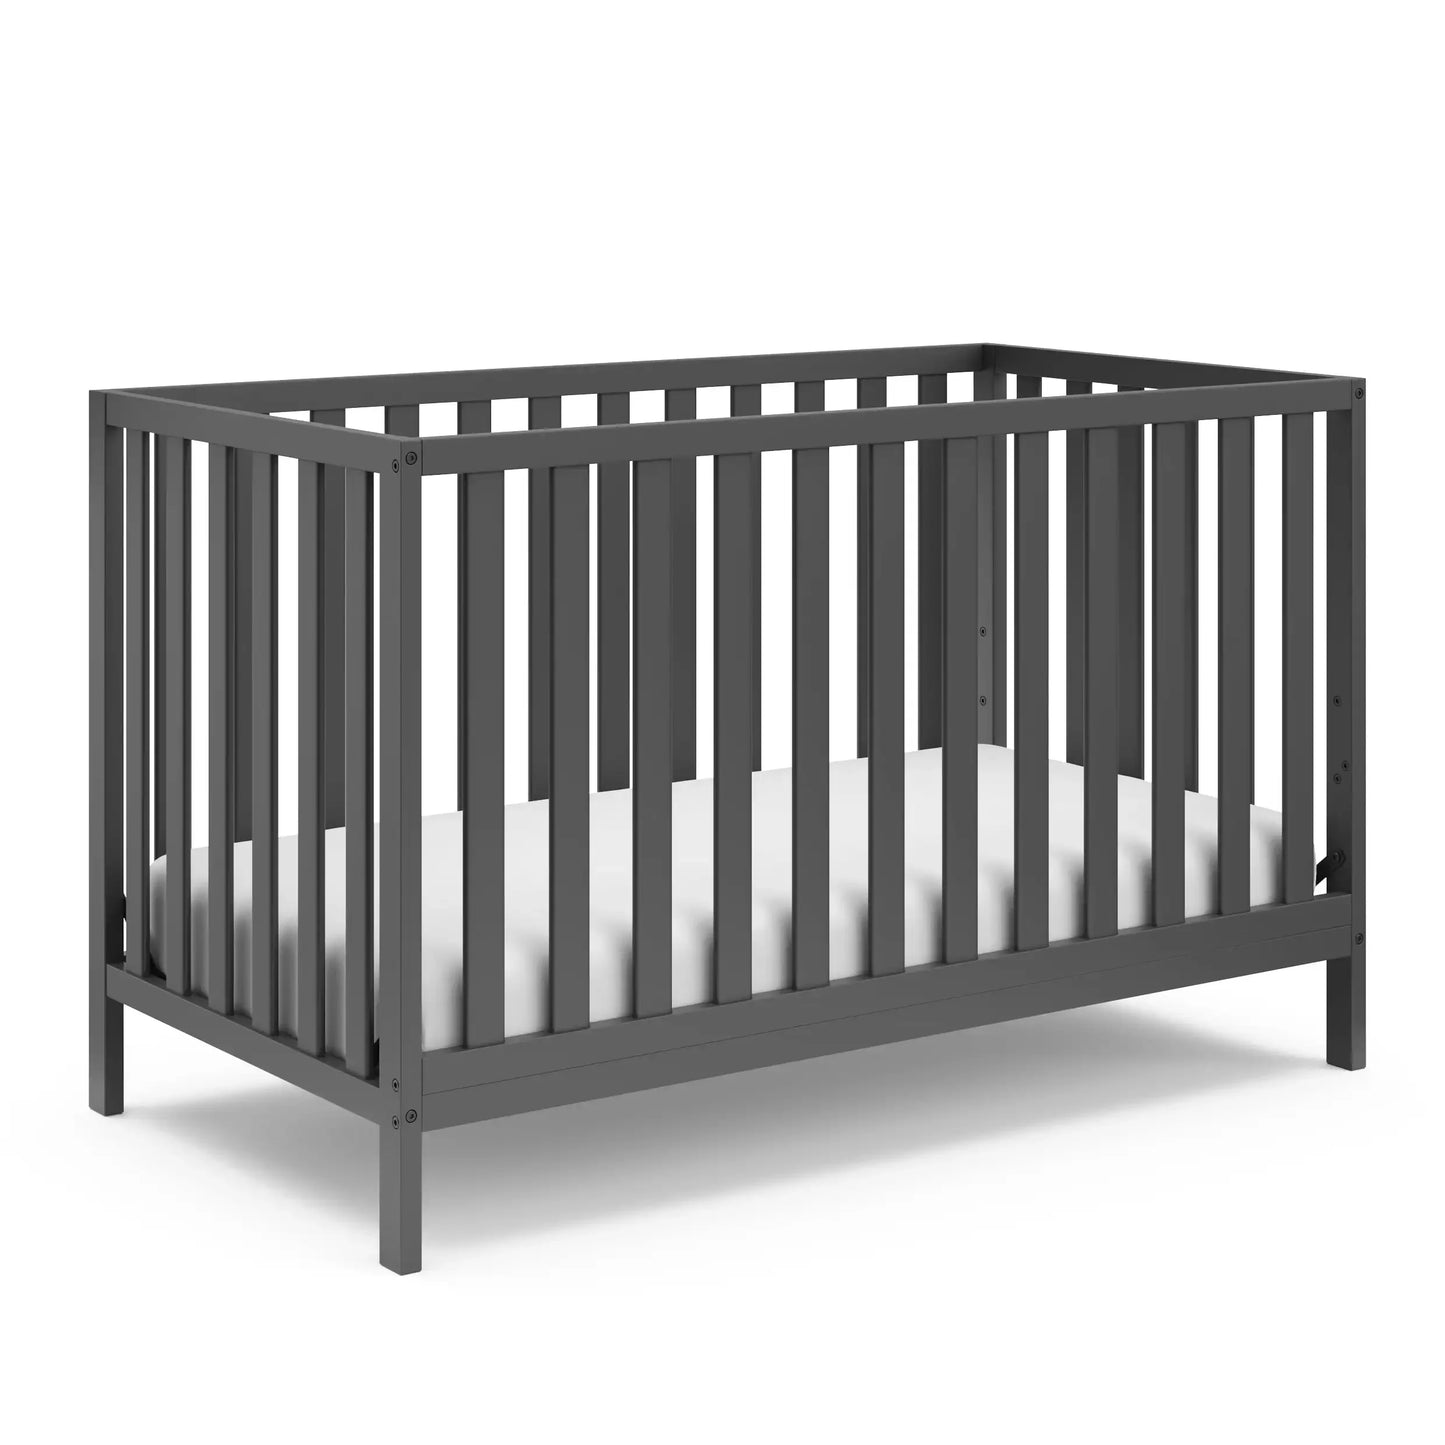 Metal Toddler Bed Sunset 4 in 1 Convertible Baby Crib, White Bed Frame For Children ShopOnlyDeal